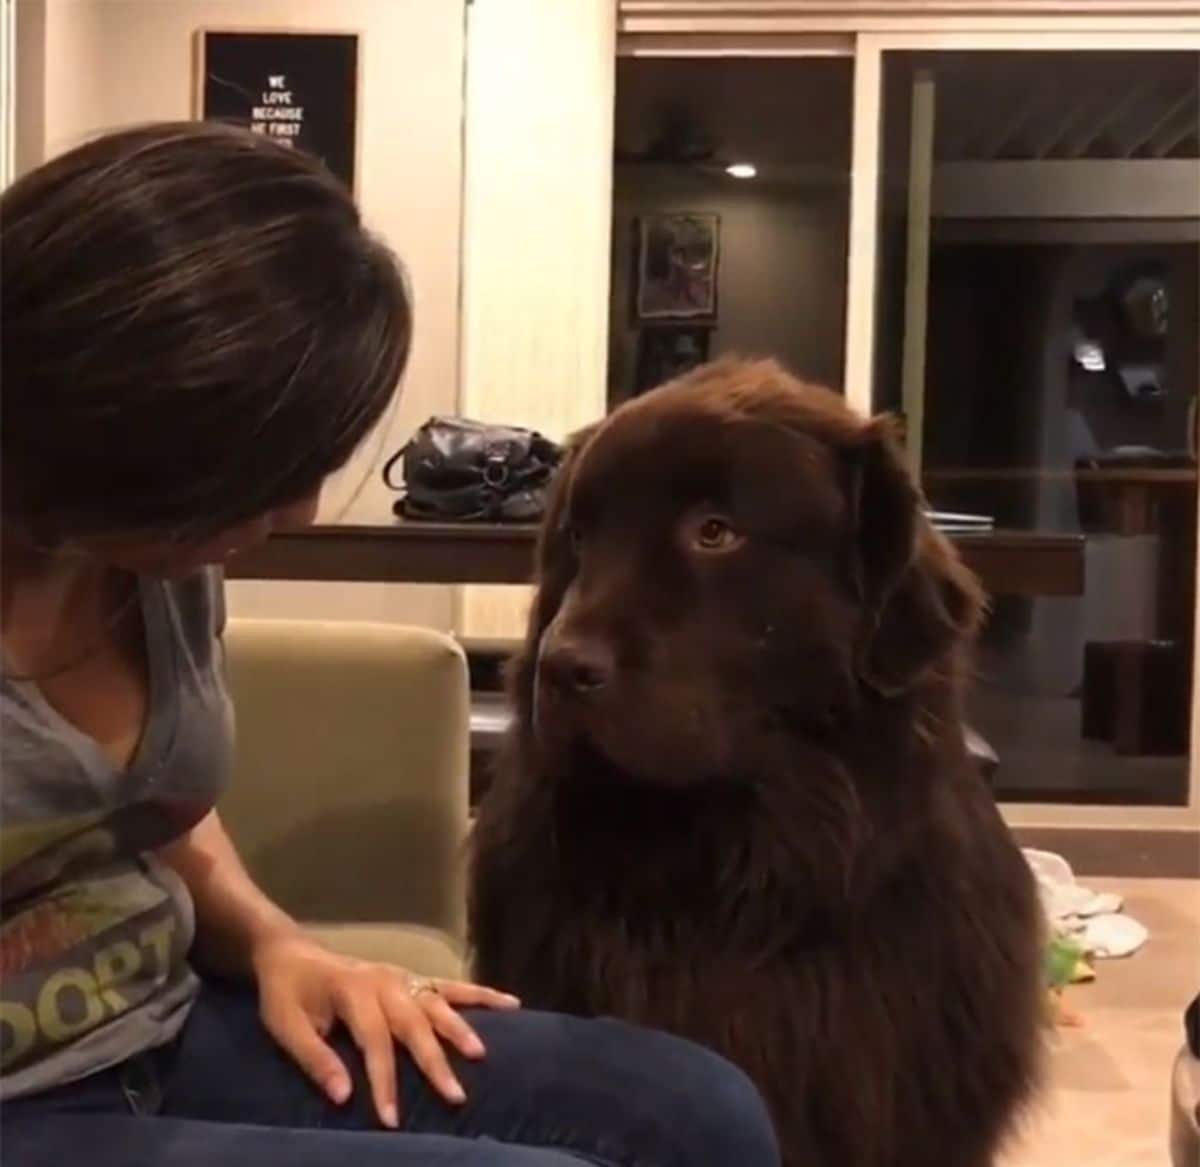 large brown dog sitting next to a woman